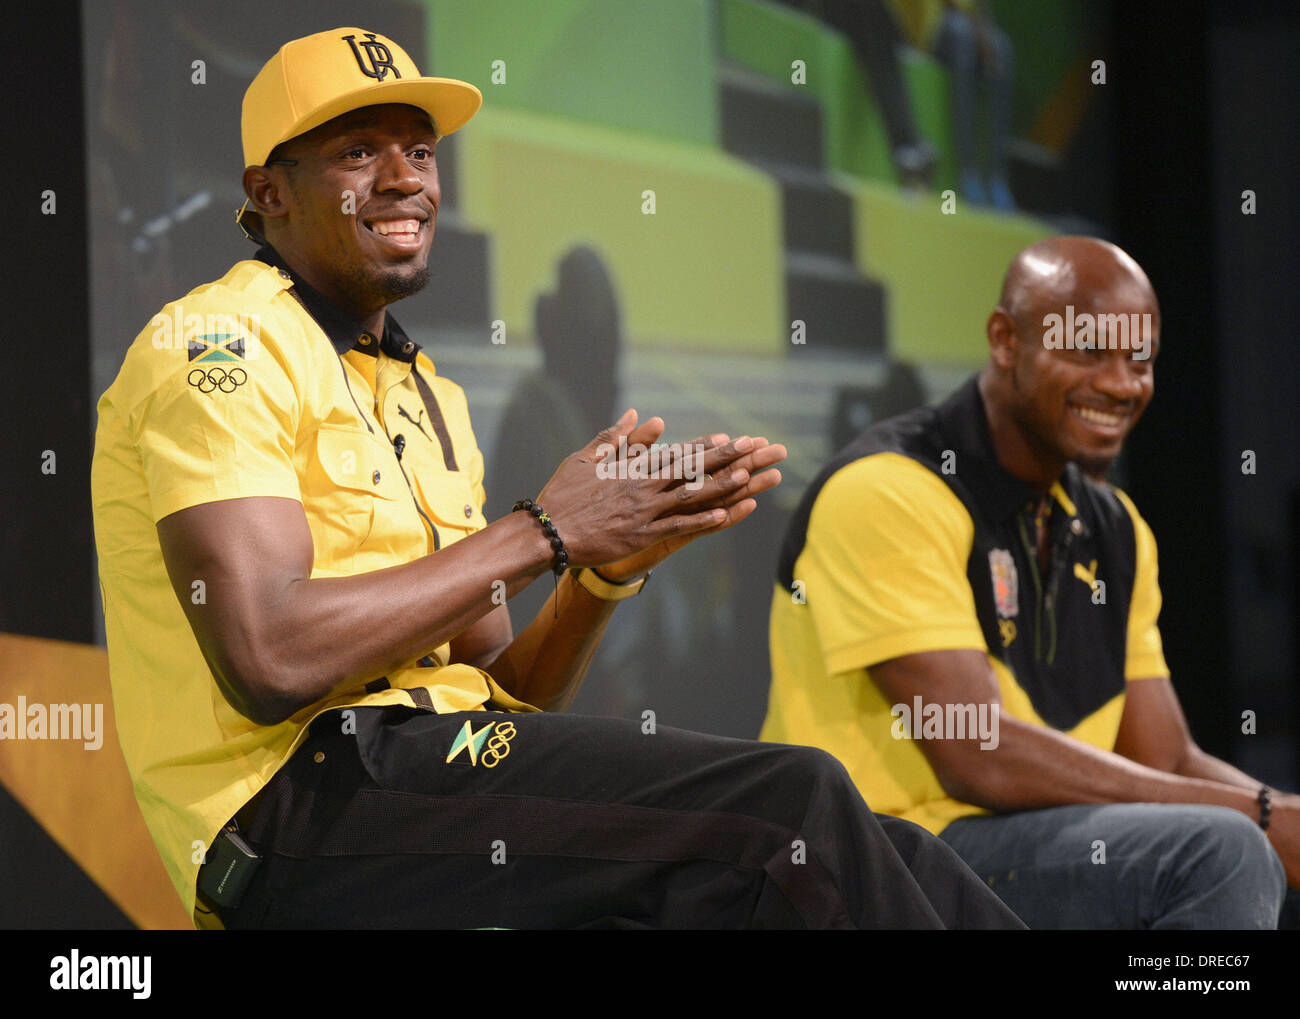 Usain Bolt of Jamaica and teammate Asafa Powell  attend a press conference in London London, England - 26.07.12 Stock Photo